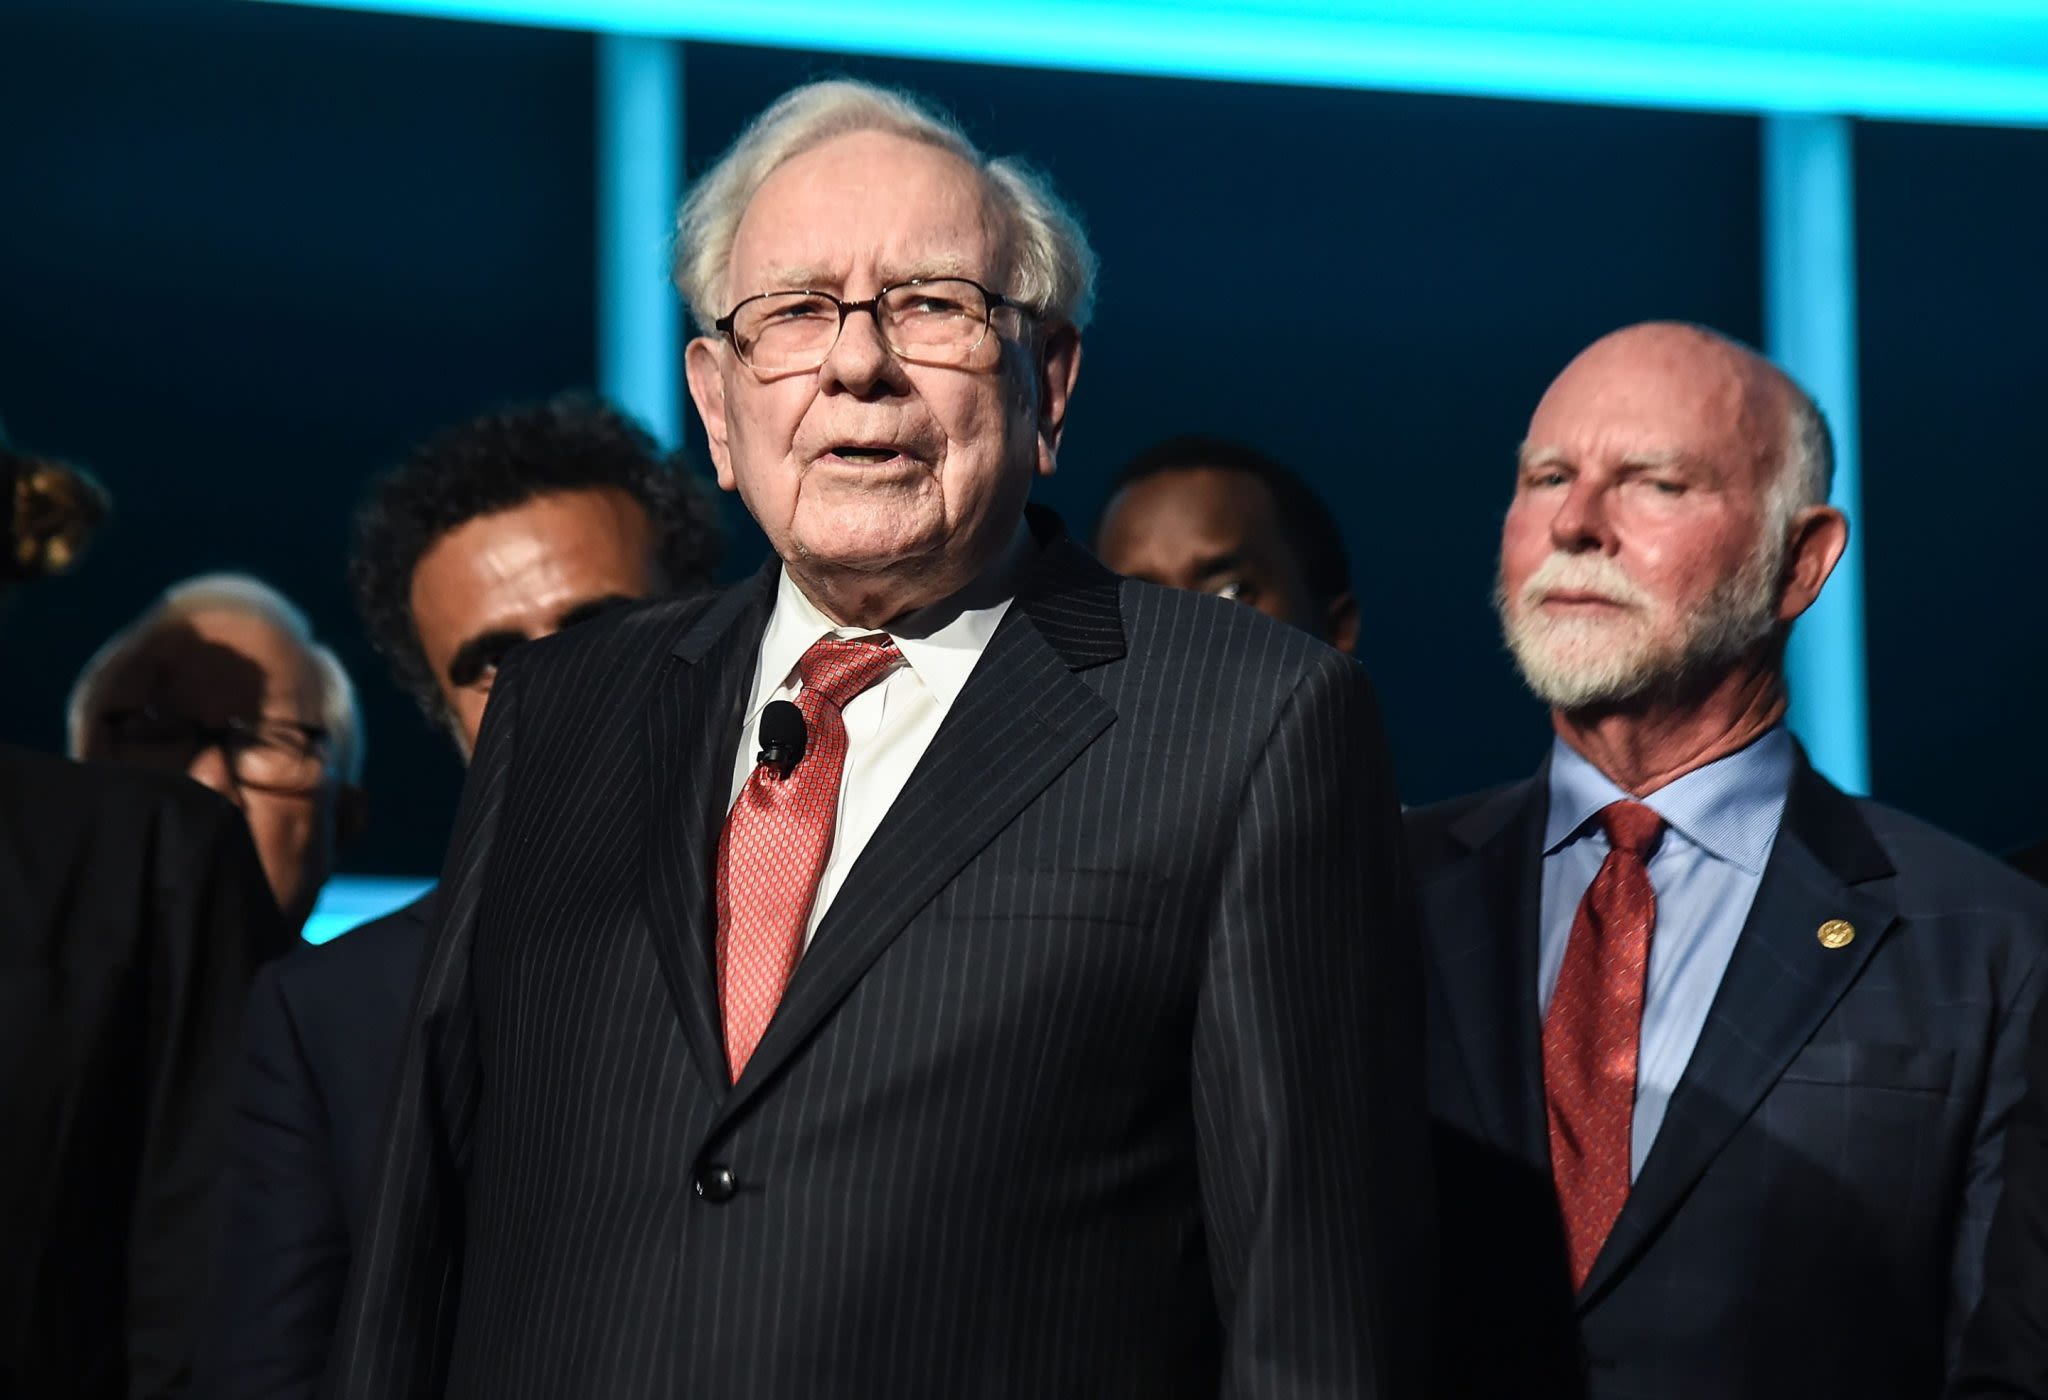 Warren Buffett says he was ‘100% responsible’ for Berkshire Hathaway’s bad bet on Paramount: ‘We lost quite a bit of money’